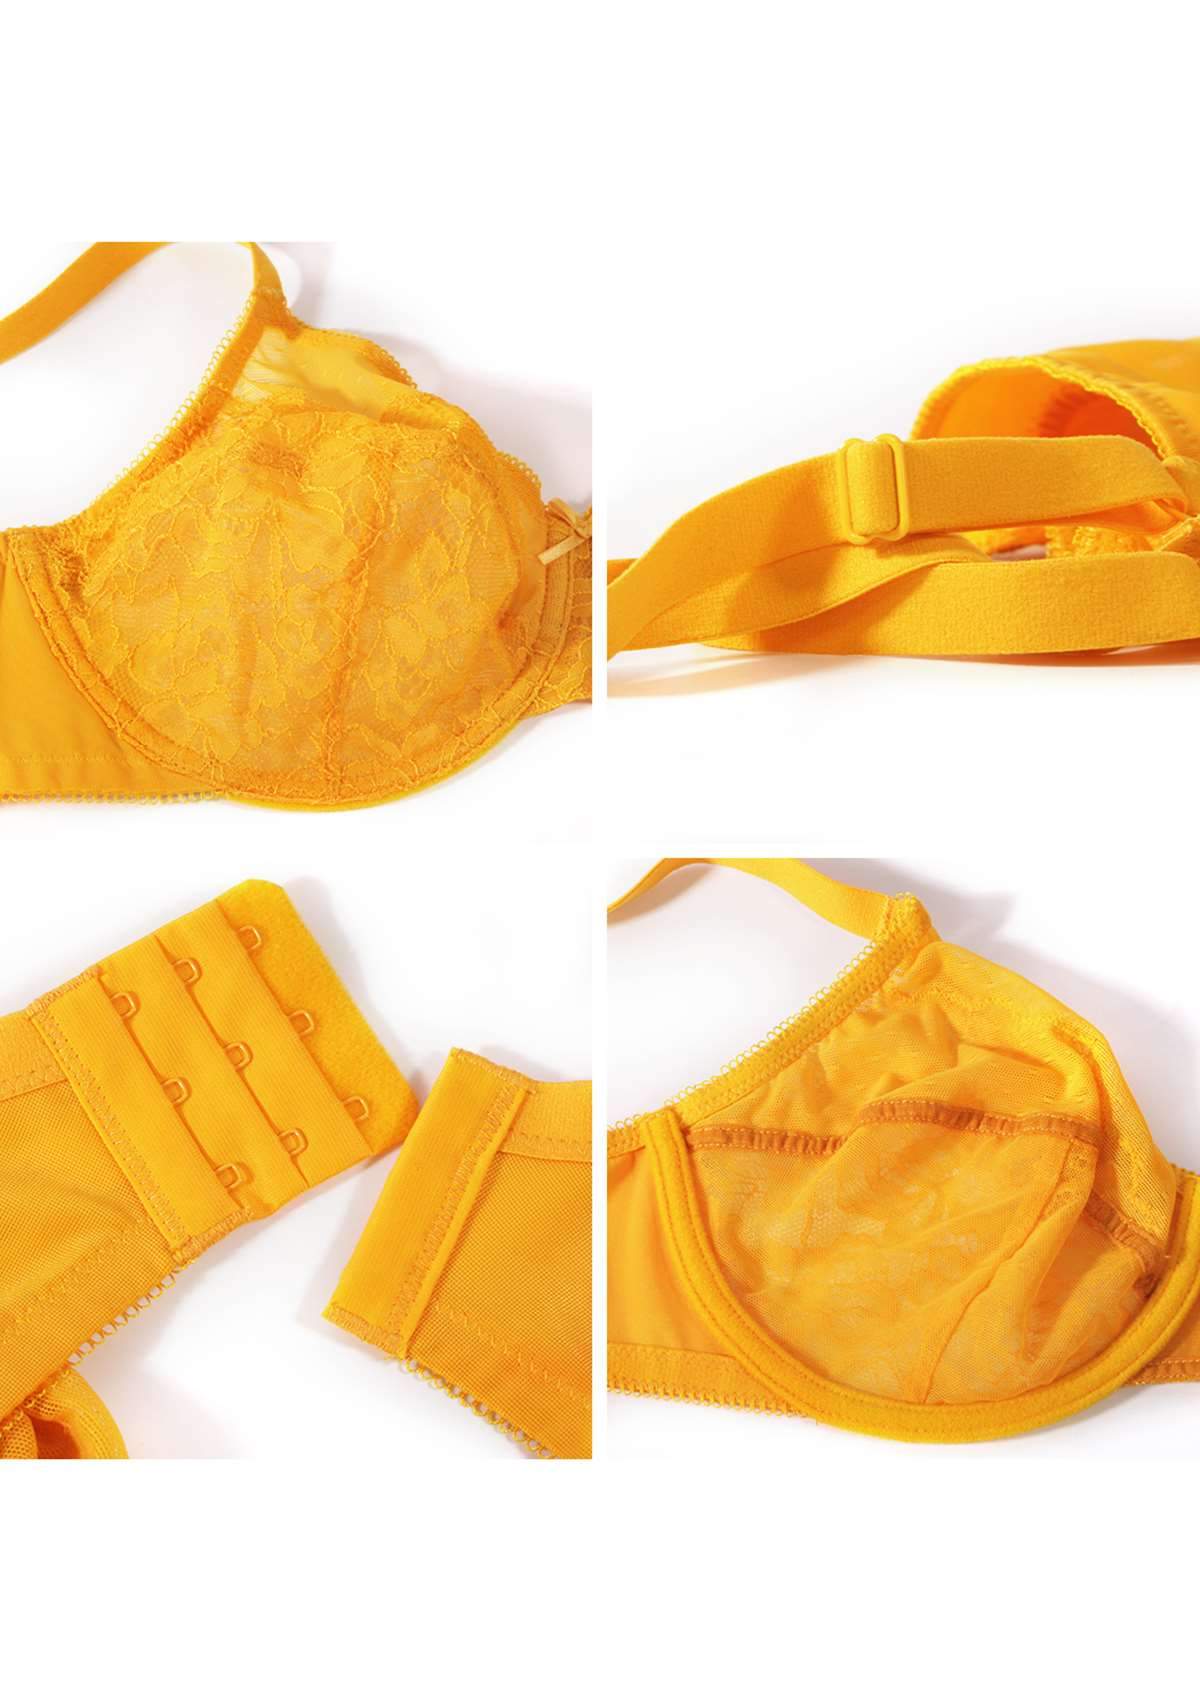 HSIA Enchante Bra And Panty Sets: Unpadded Bra With Back Support - Cadmium Yellow / 44 / D